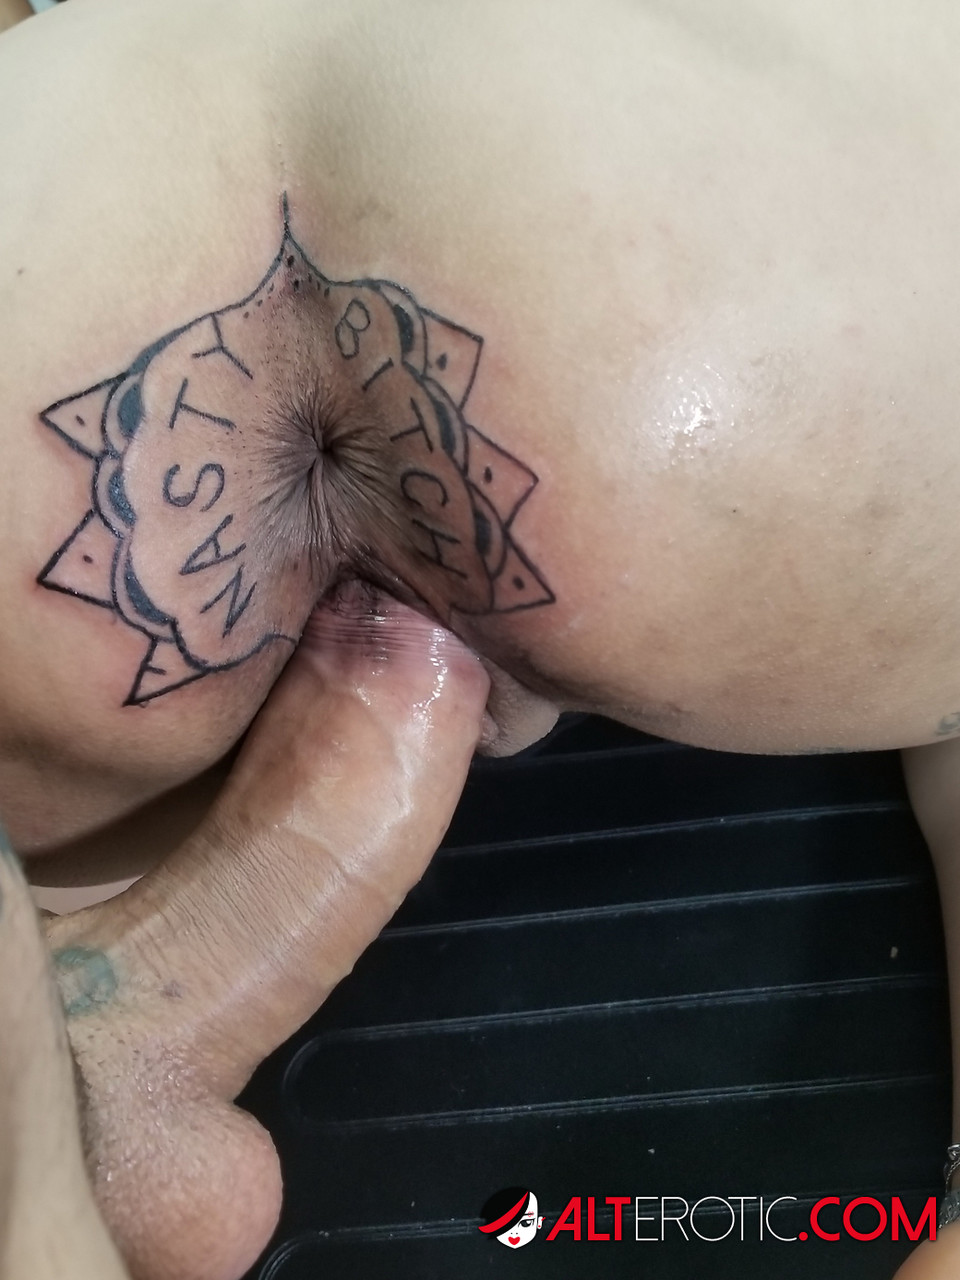 Latina chick Kitty Jaguar gets a butt tattoo before being fucked foto porno #424168461 | Alt Erotic Pics, Kitty Jaguar, Tattoo, porno mobile